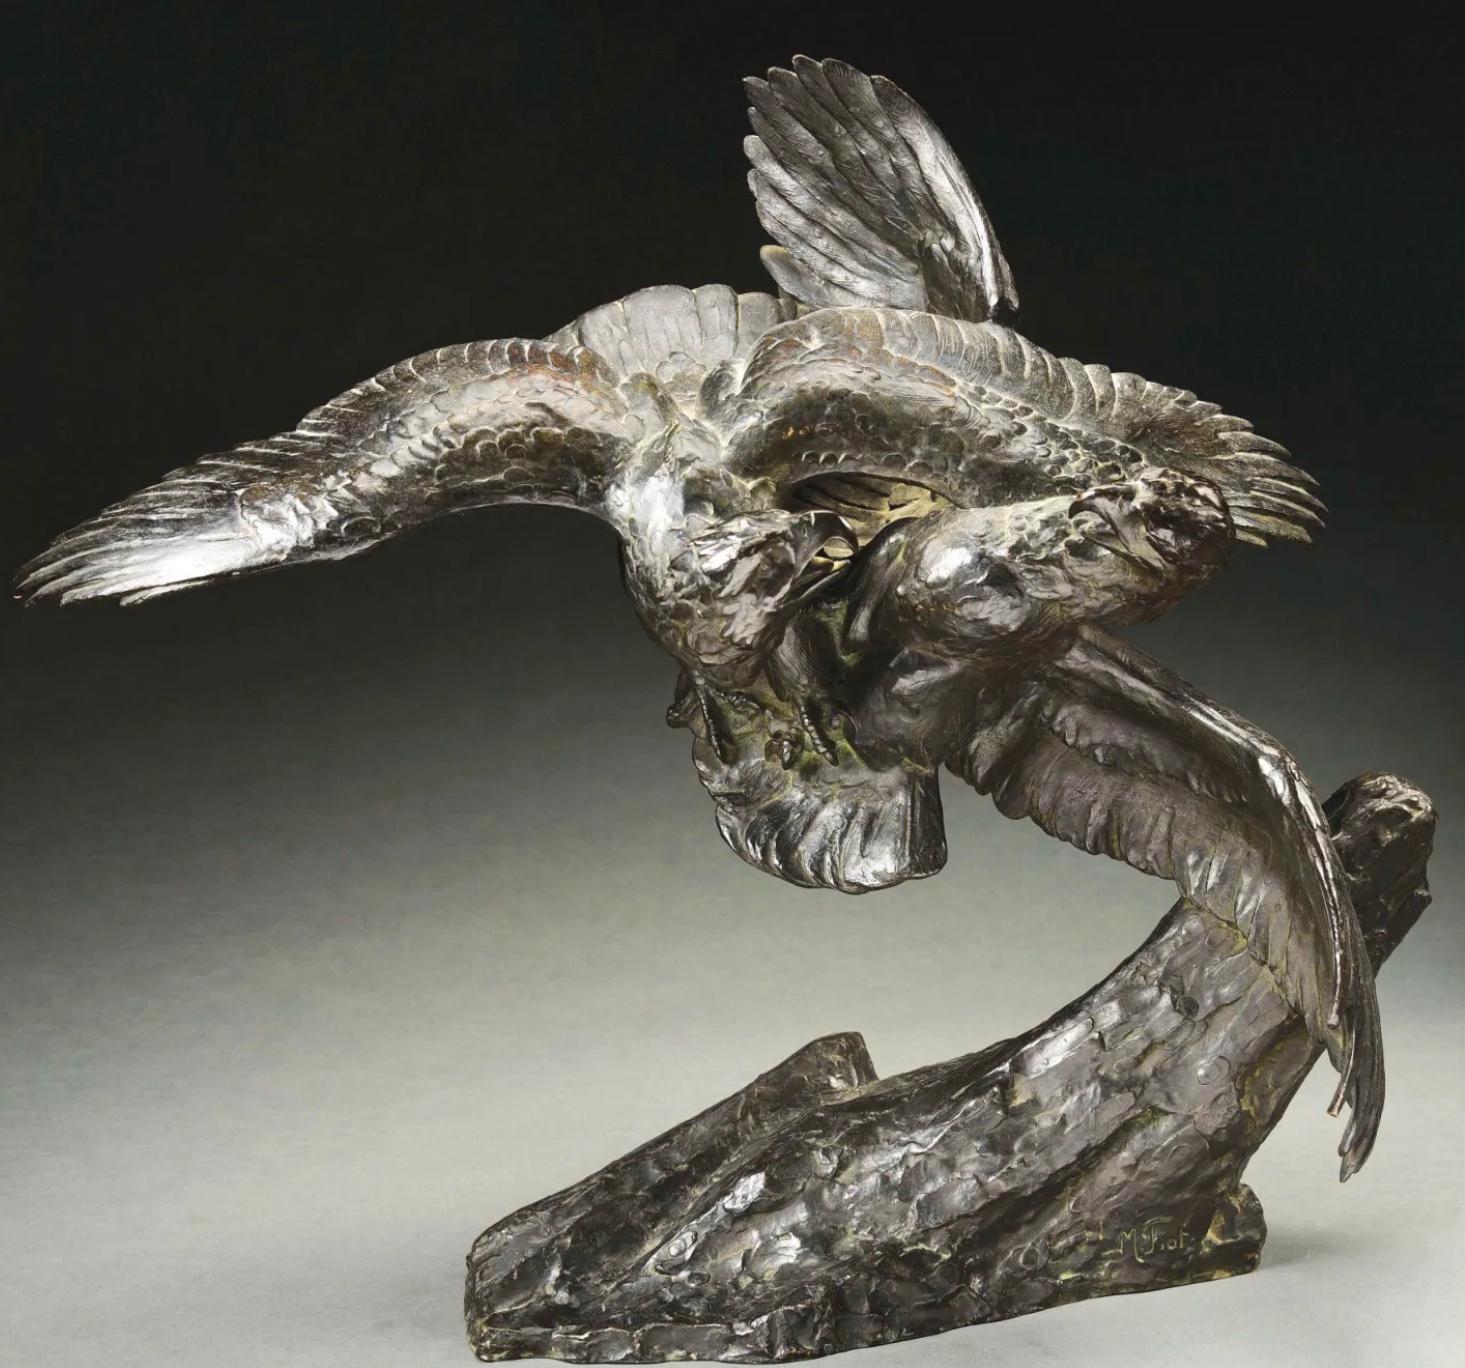 Maximilien Louis Fiot (French, 1886 - 1953)

A very large bronze animalier sculpture of combatant eagles in flight above an outcropping or rocks. The Eagles are fighting for their lives with claws dug in and beaks ready to strike. A very moving